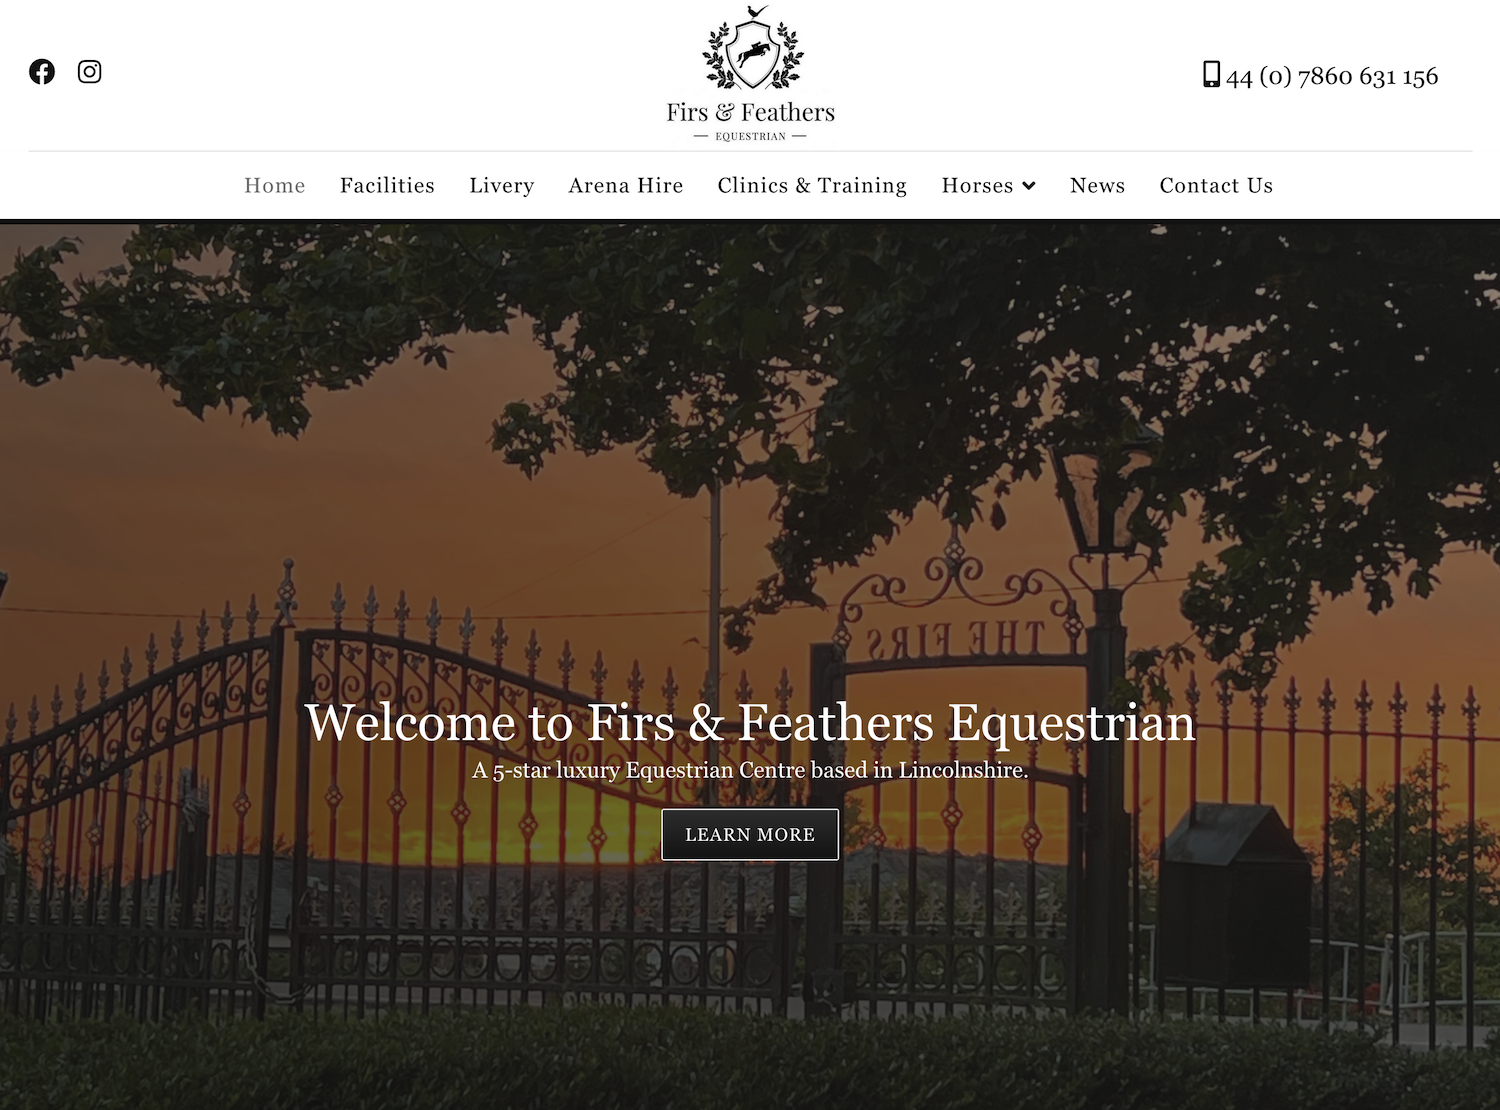 Firs & Feathers Equestrian by WA Designs